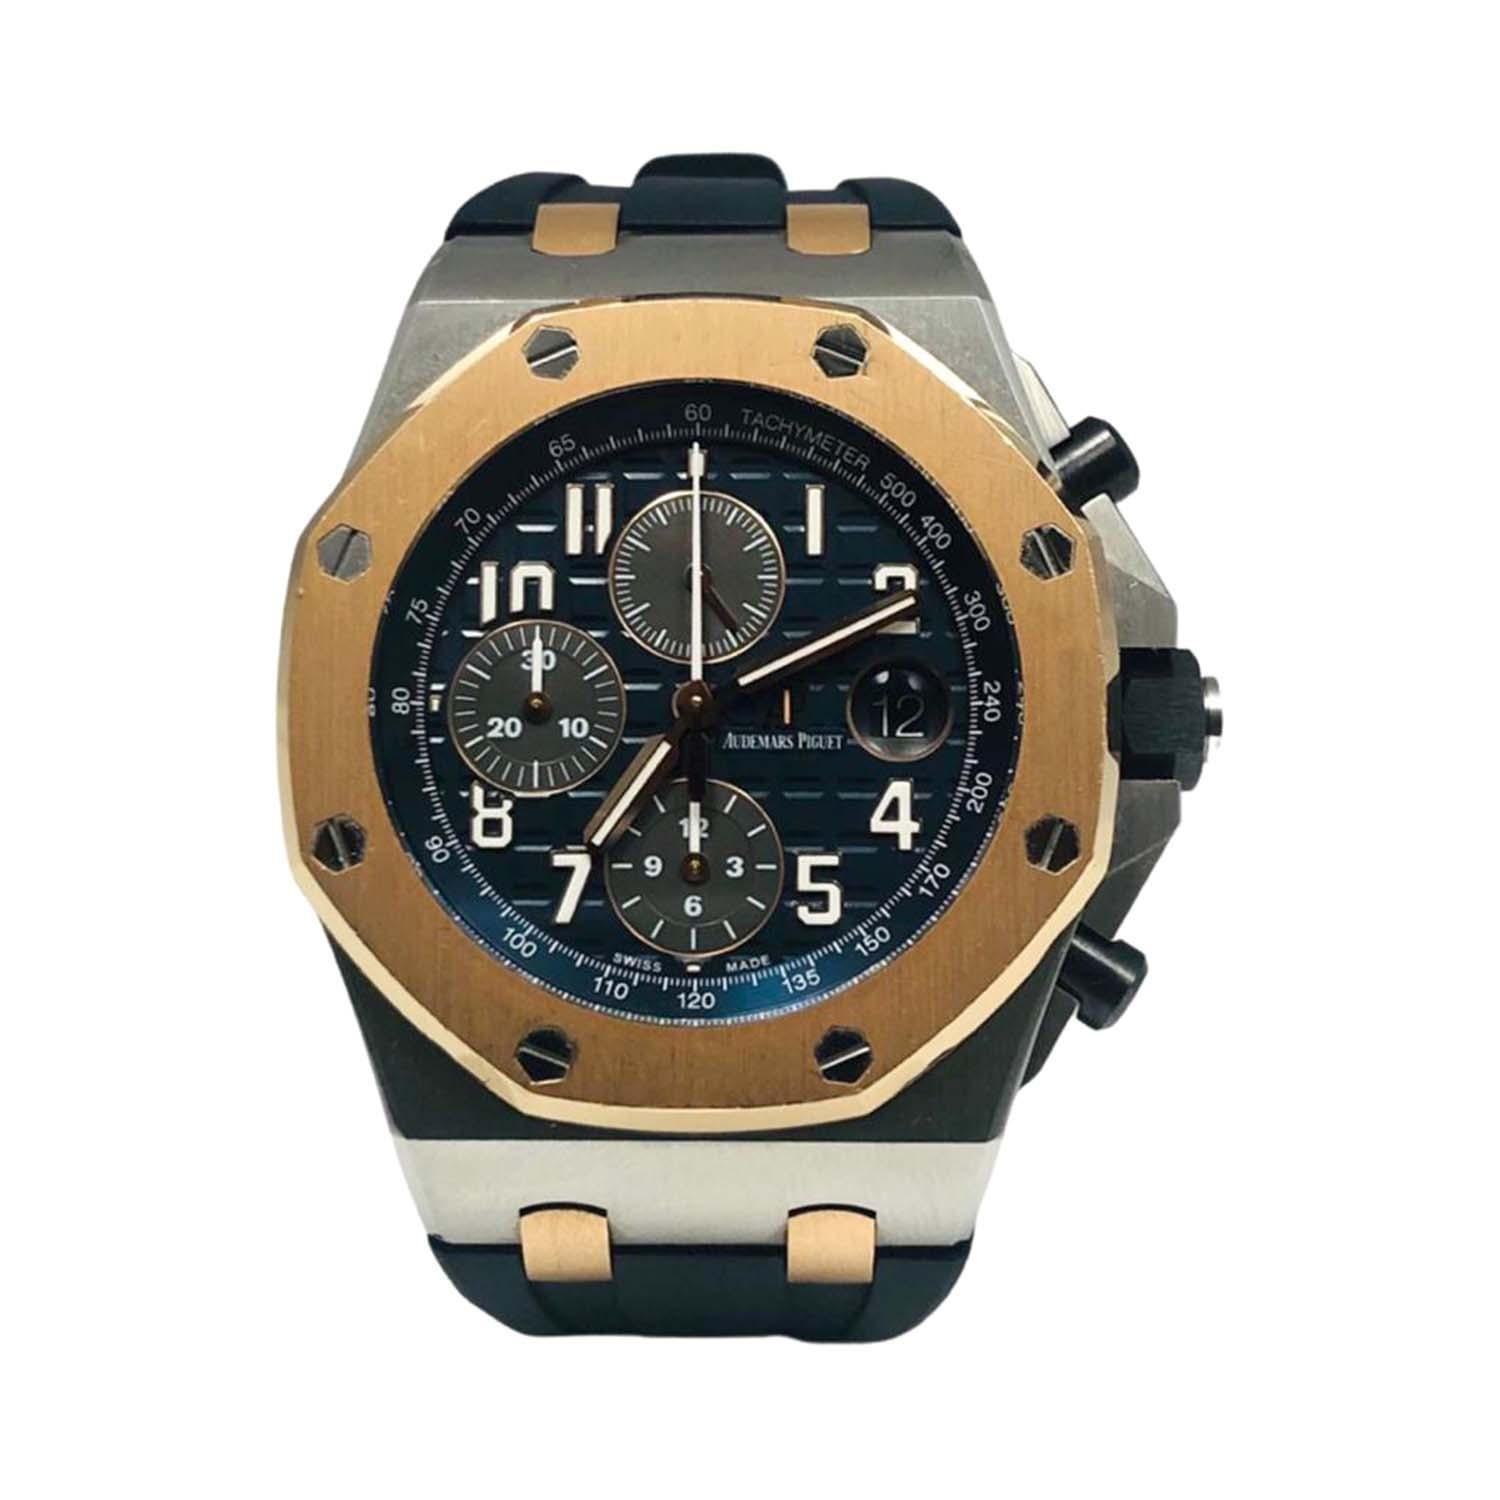 Brand: Audemars Piguet

Model Name: Royal Oak Offshore

Model Reference: 26471SR.OO.D101CR.01

Movement: Automatic

Case Size: 42mm

Case Material: Stainless Steel/Rose Gold

Dial: Blue; Chrono

Crystal: Scratch Resistant Sapphire

Bracelet